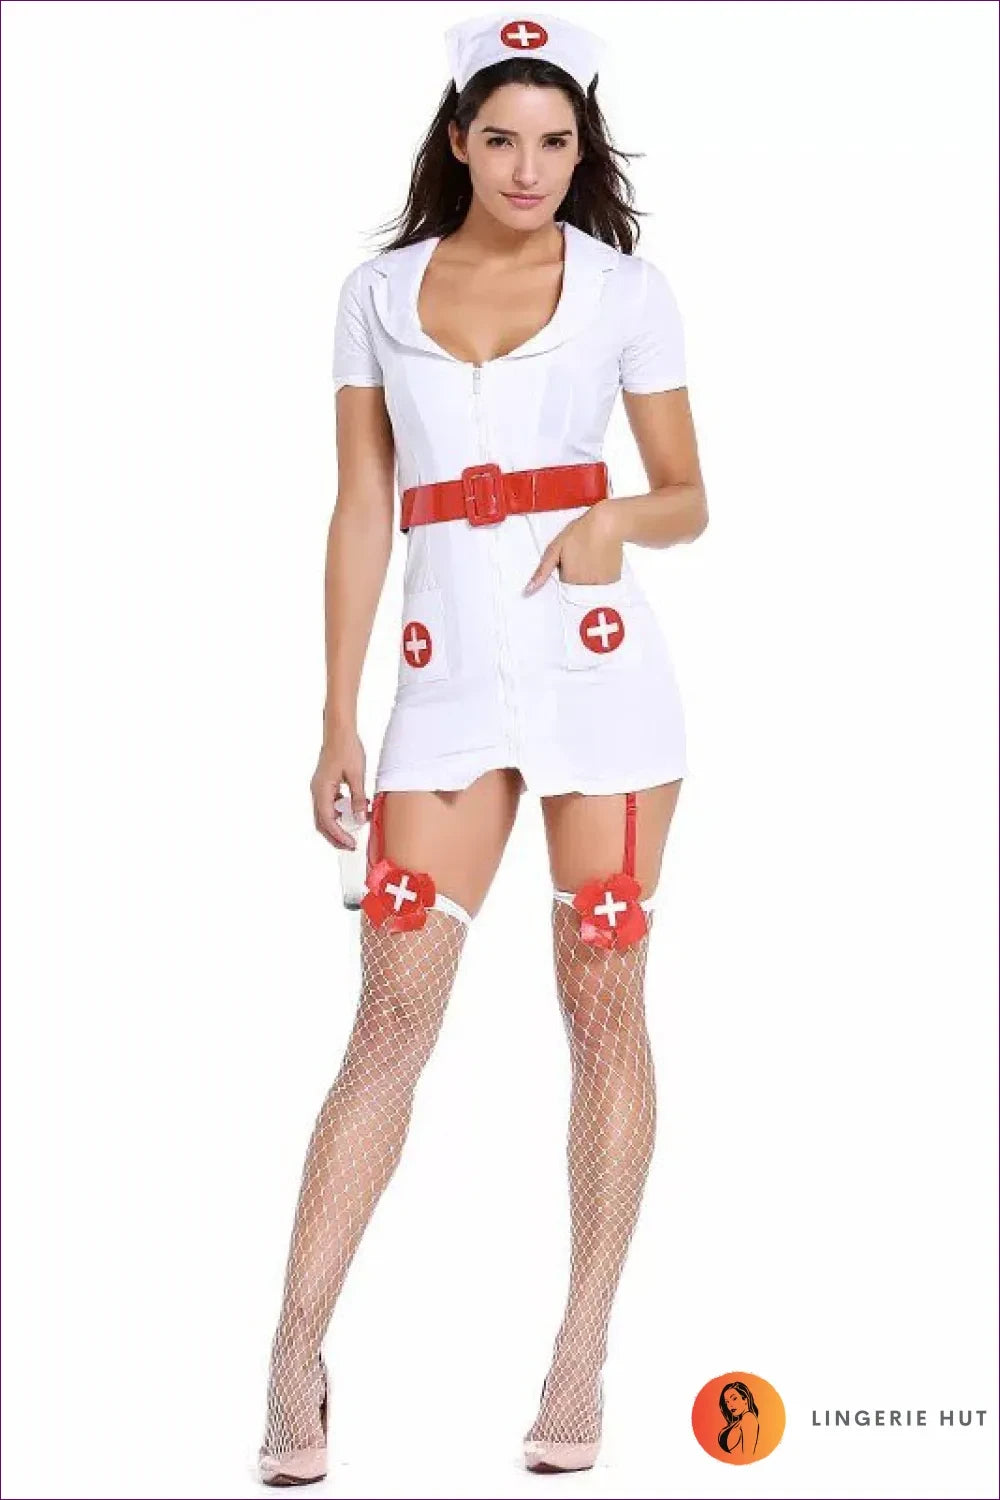 Get Ready To Ignite Passion And Explore Fantasies With Our Seductive Nurse Costume. Complete The Sexy Look